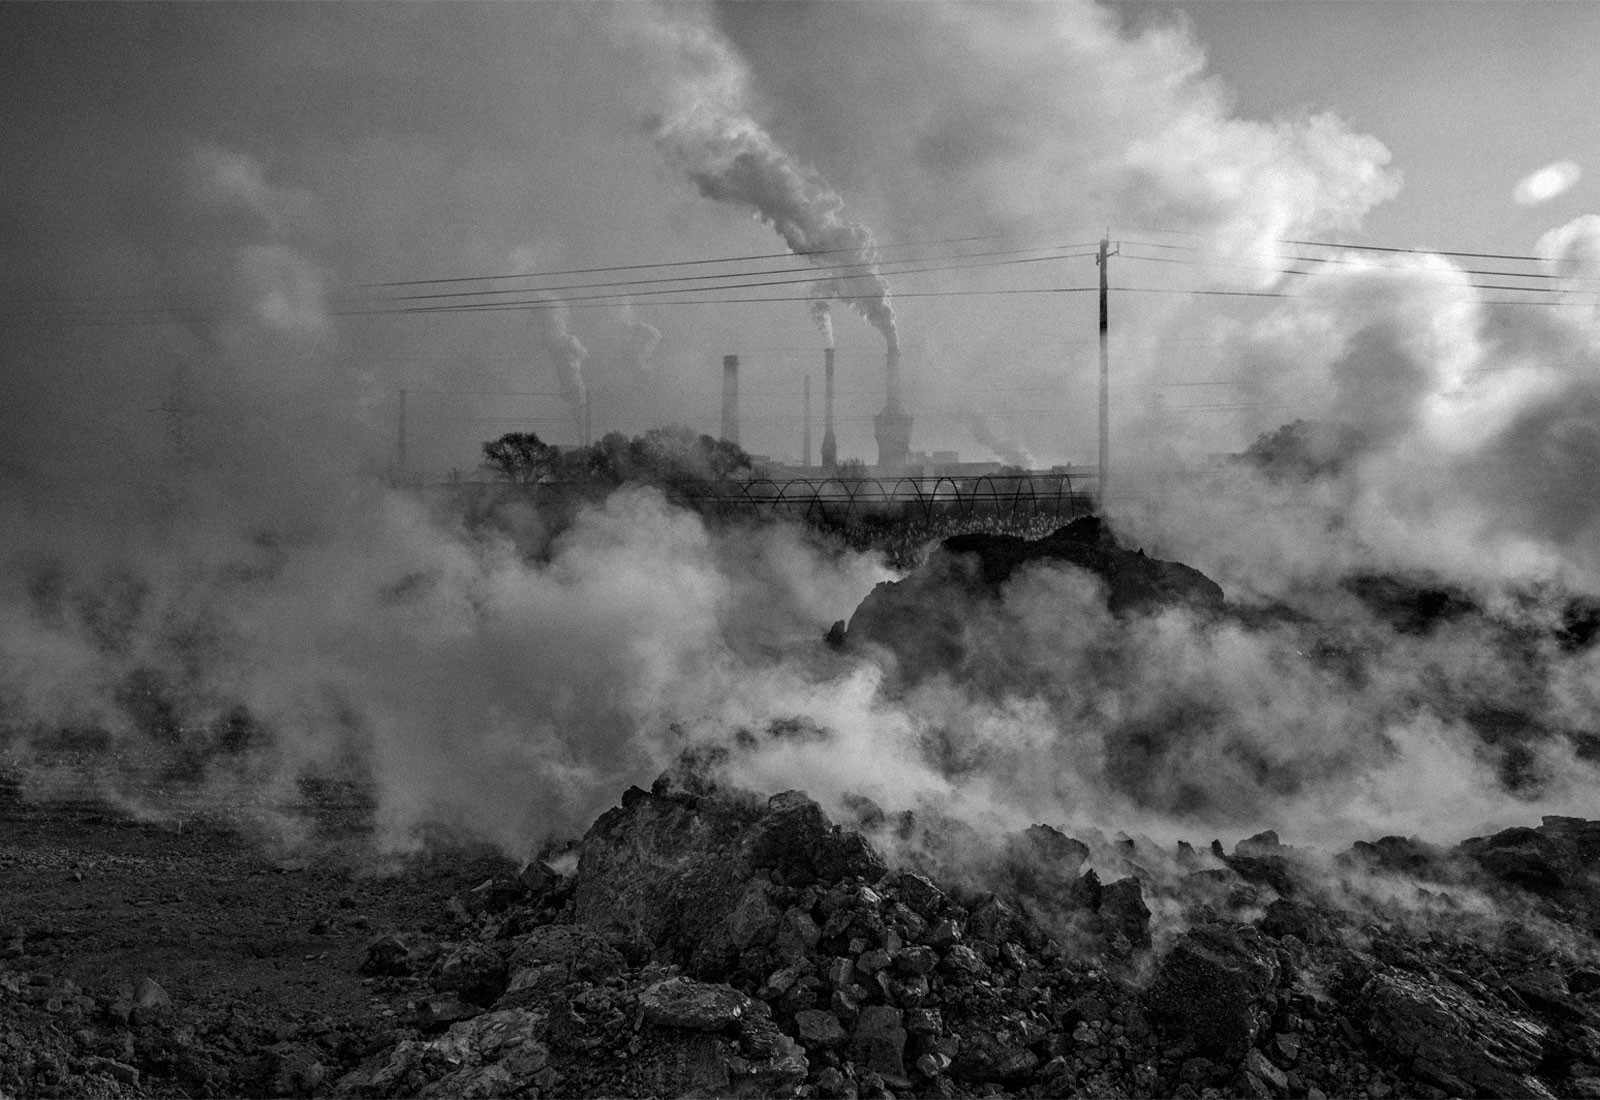 Smoke and steam rising from piles of coal waste with smokestacks in the background